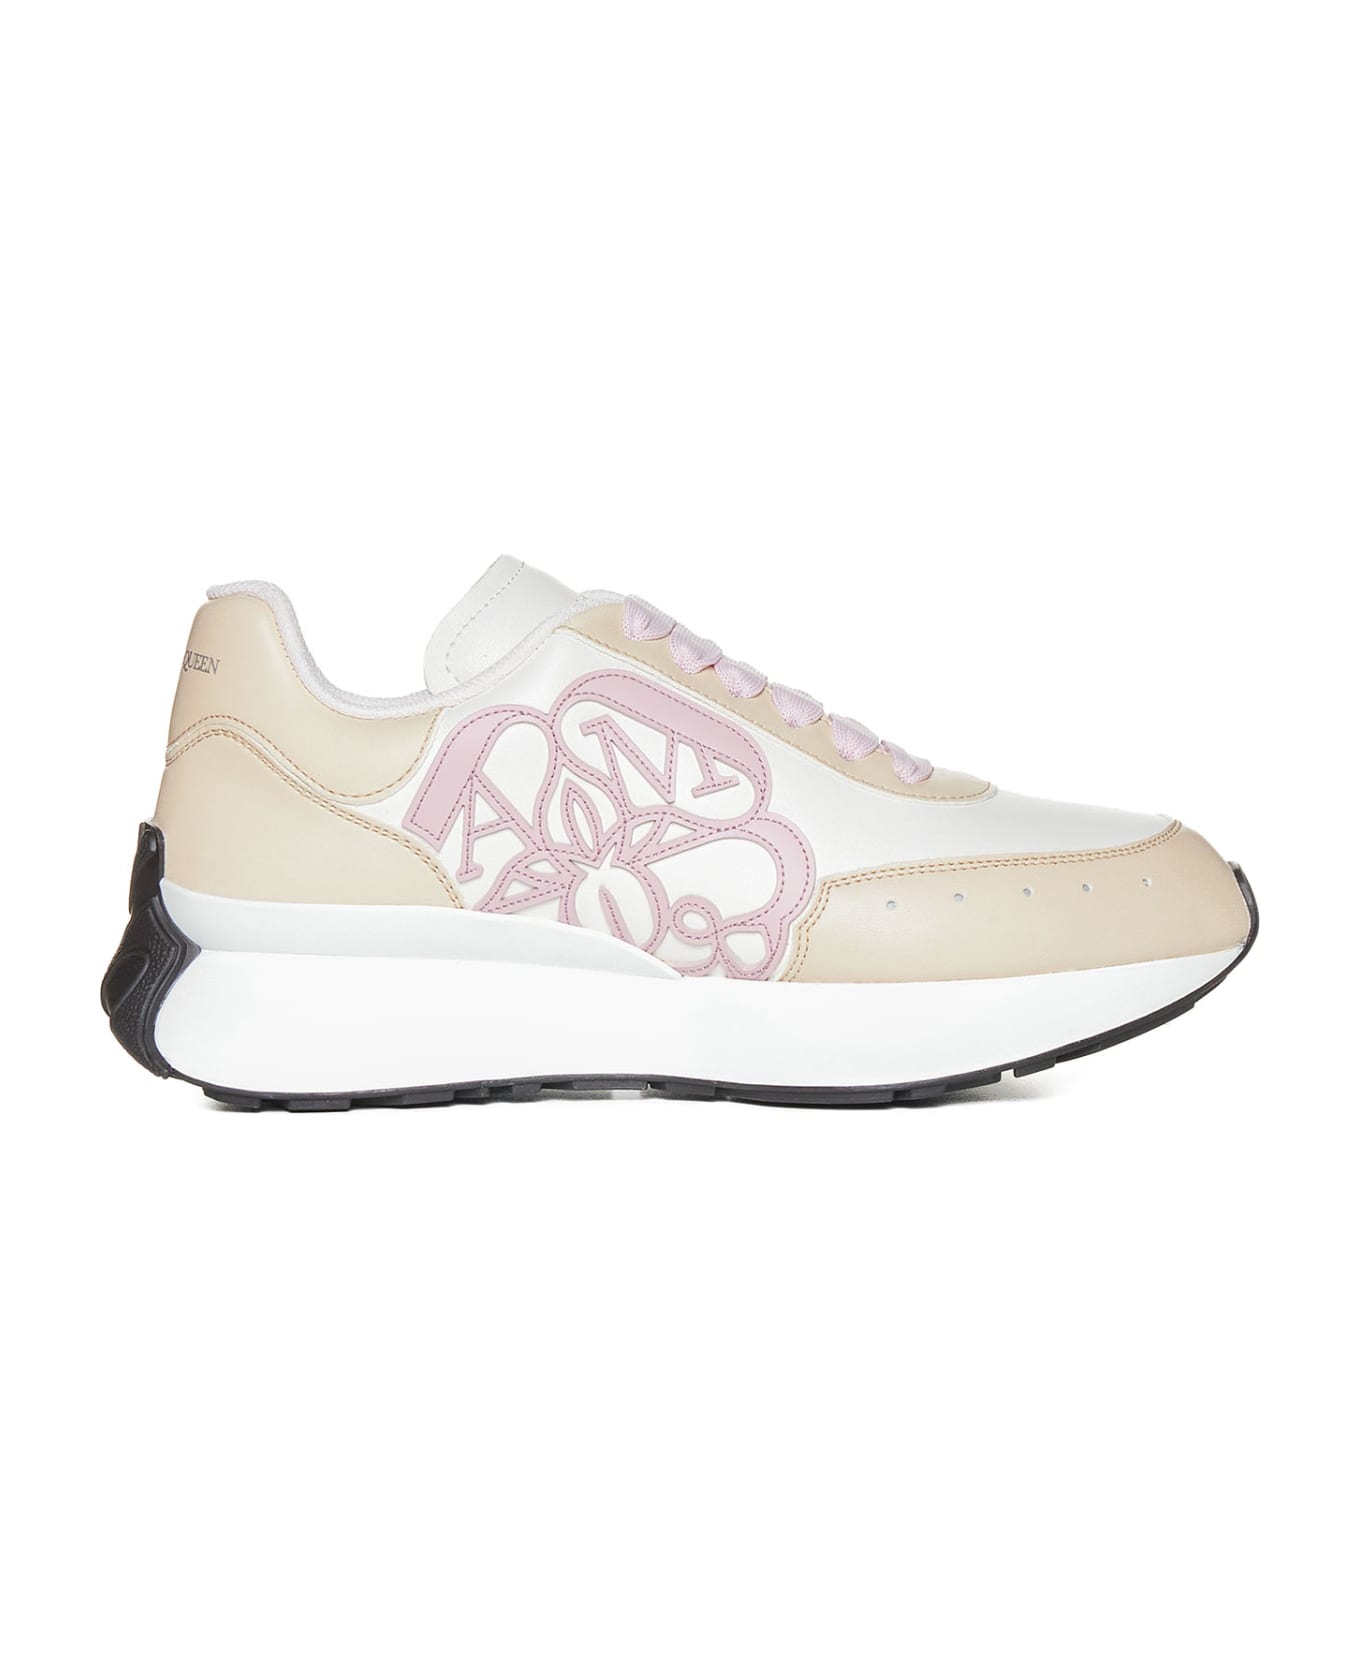 Alexander McQueen Sprint Runner Sneakers - Wh/ca./po./si/wh/blk